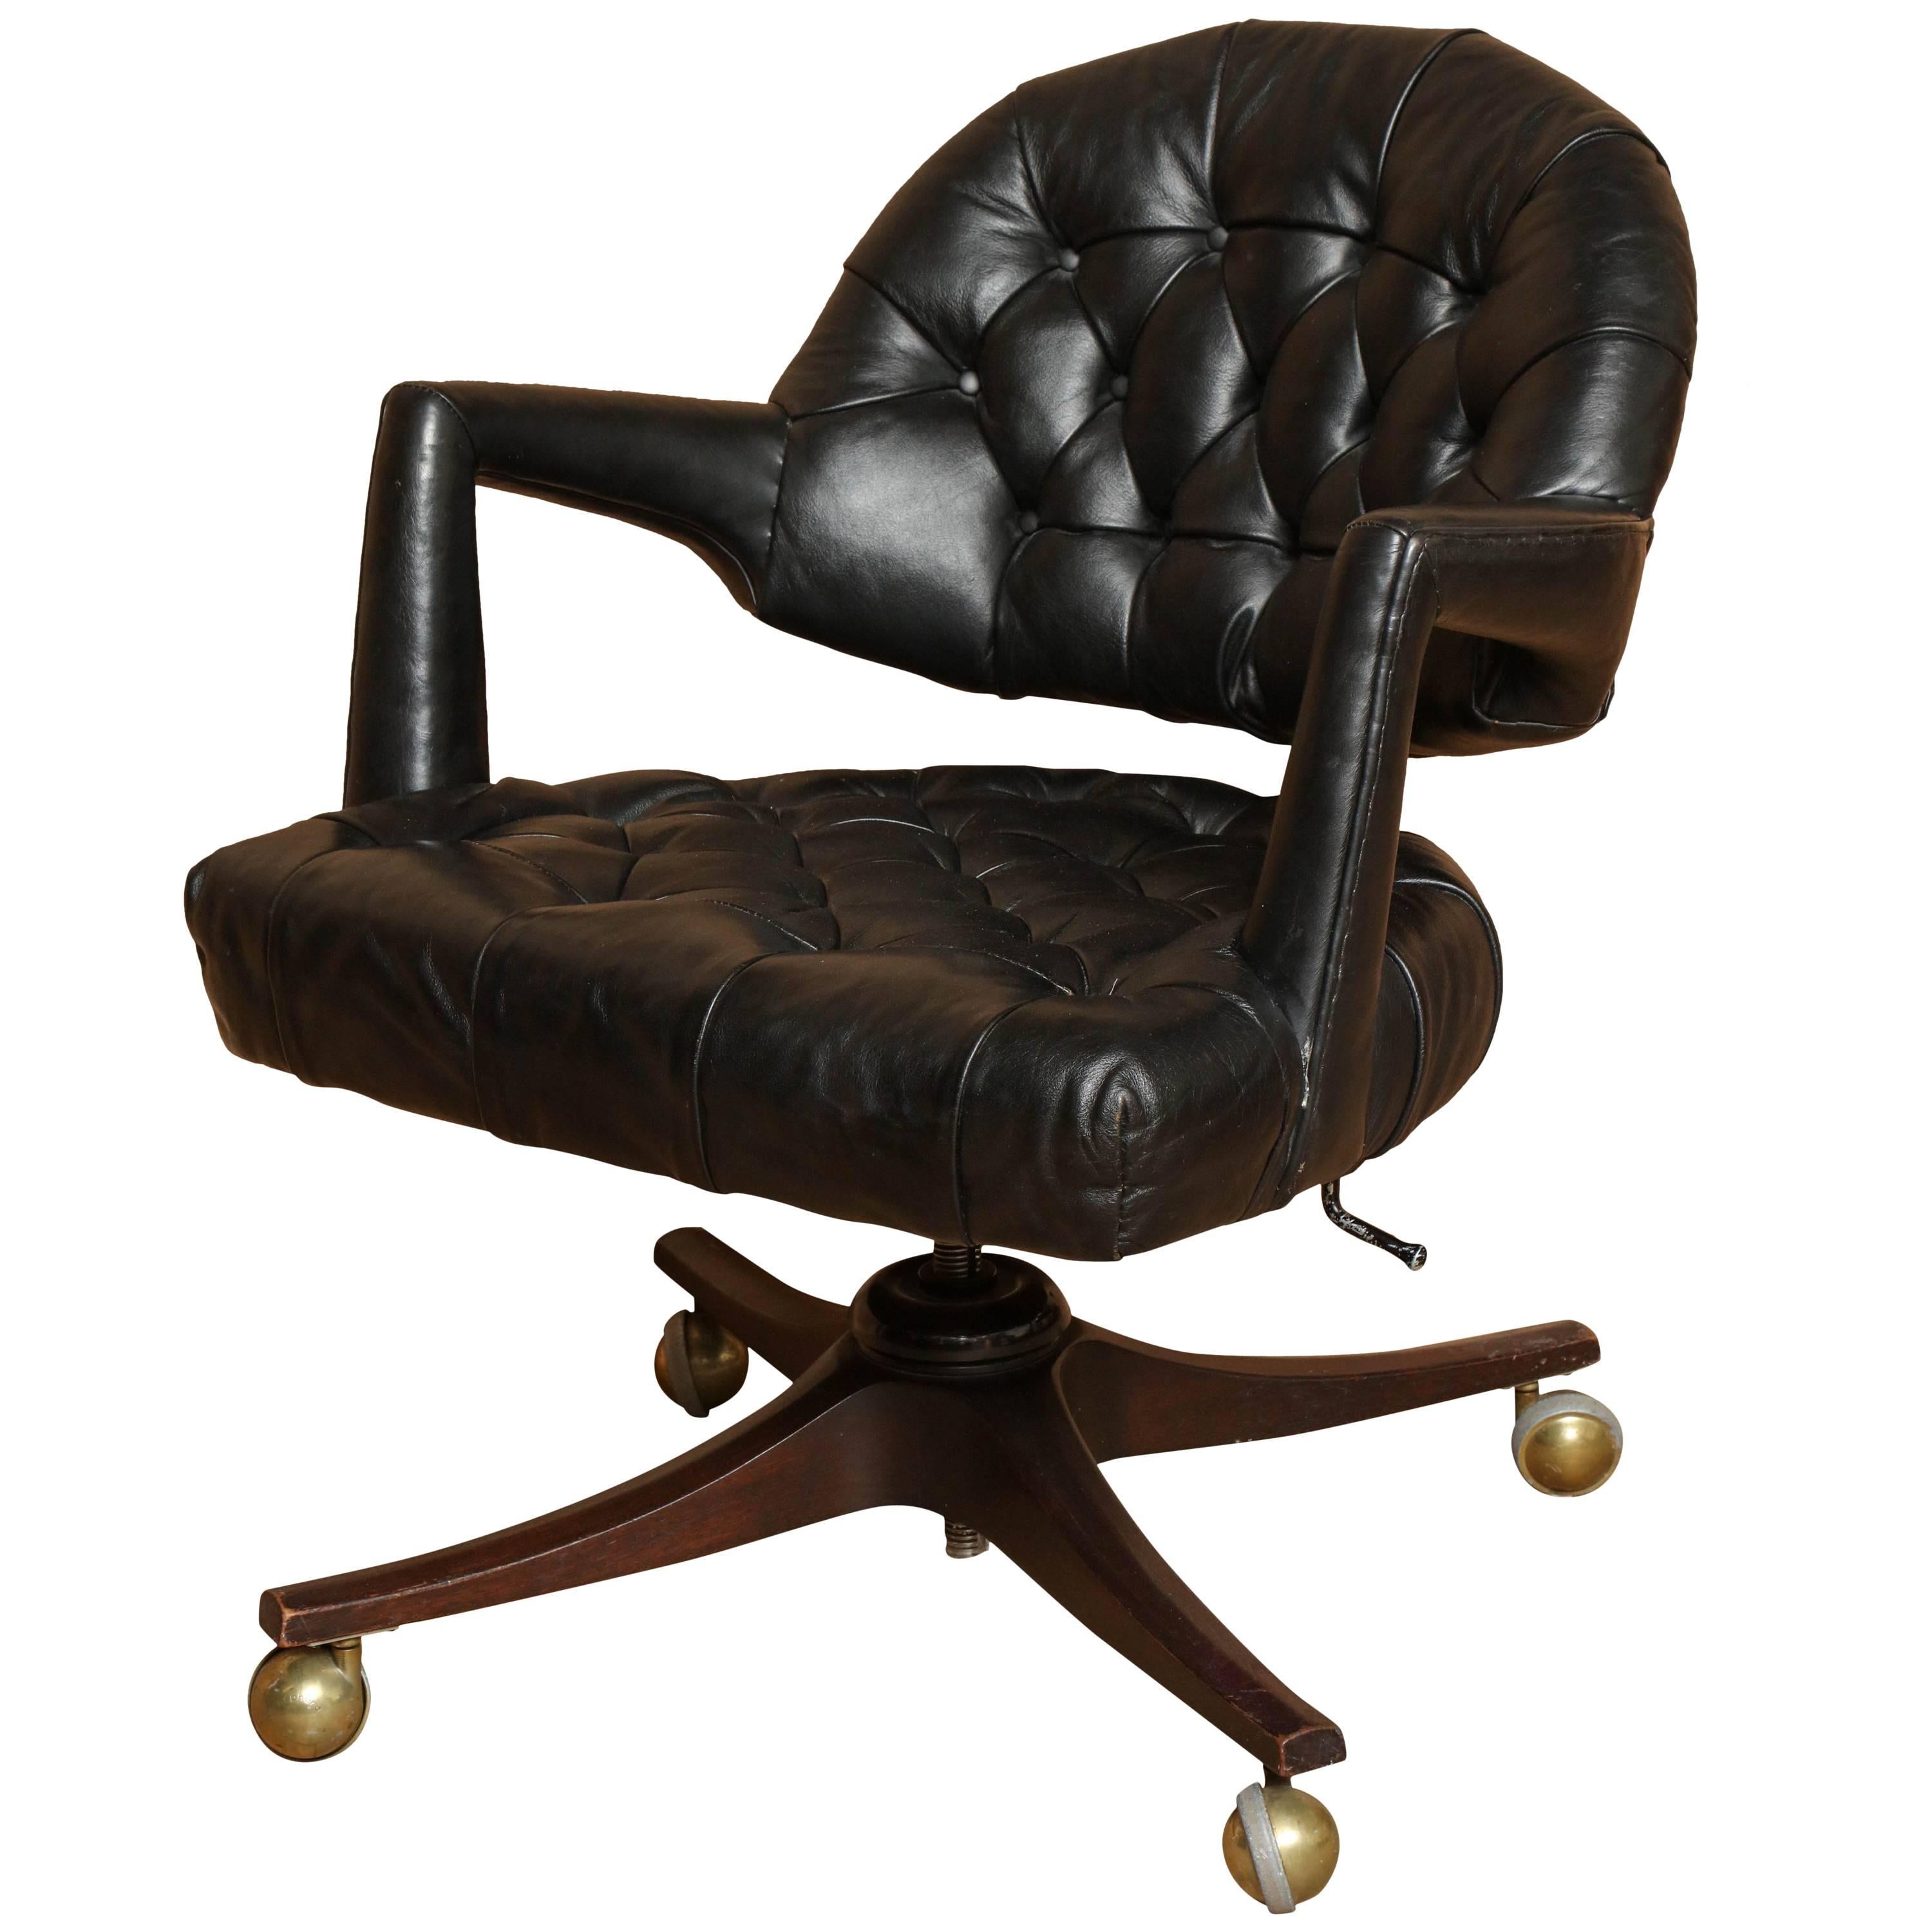 Dunbar "Executive" Swivel Office Chair in Black Leather by Edward Wormley